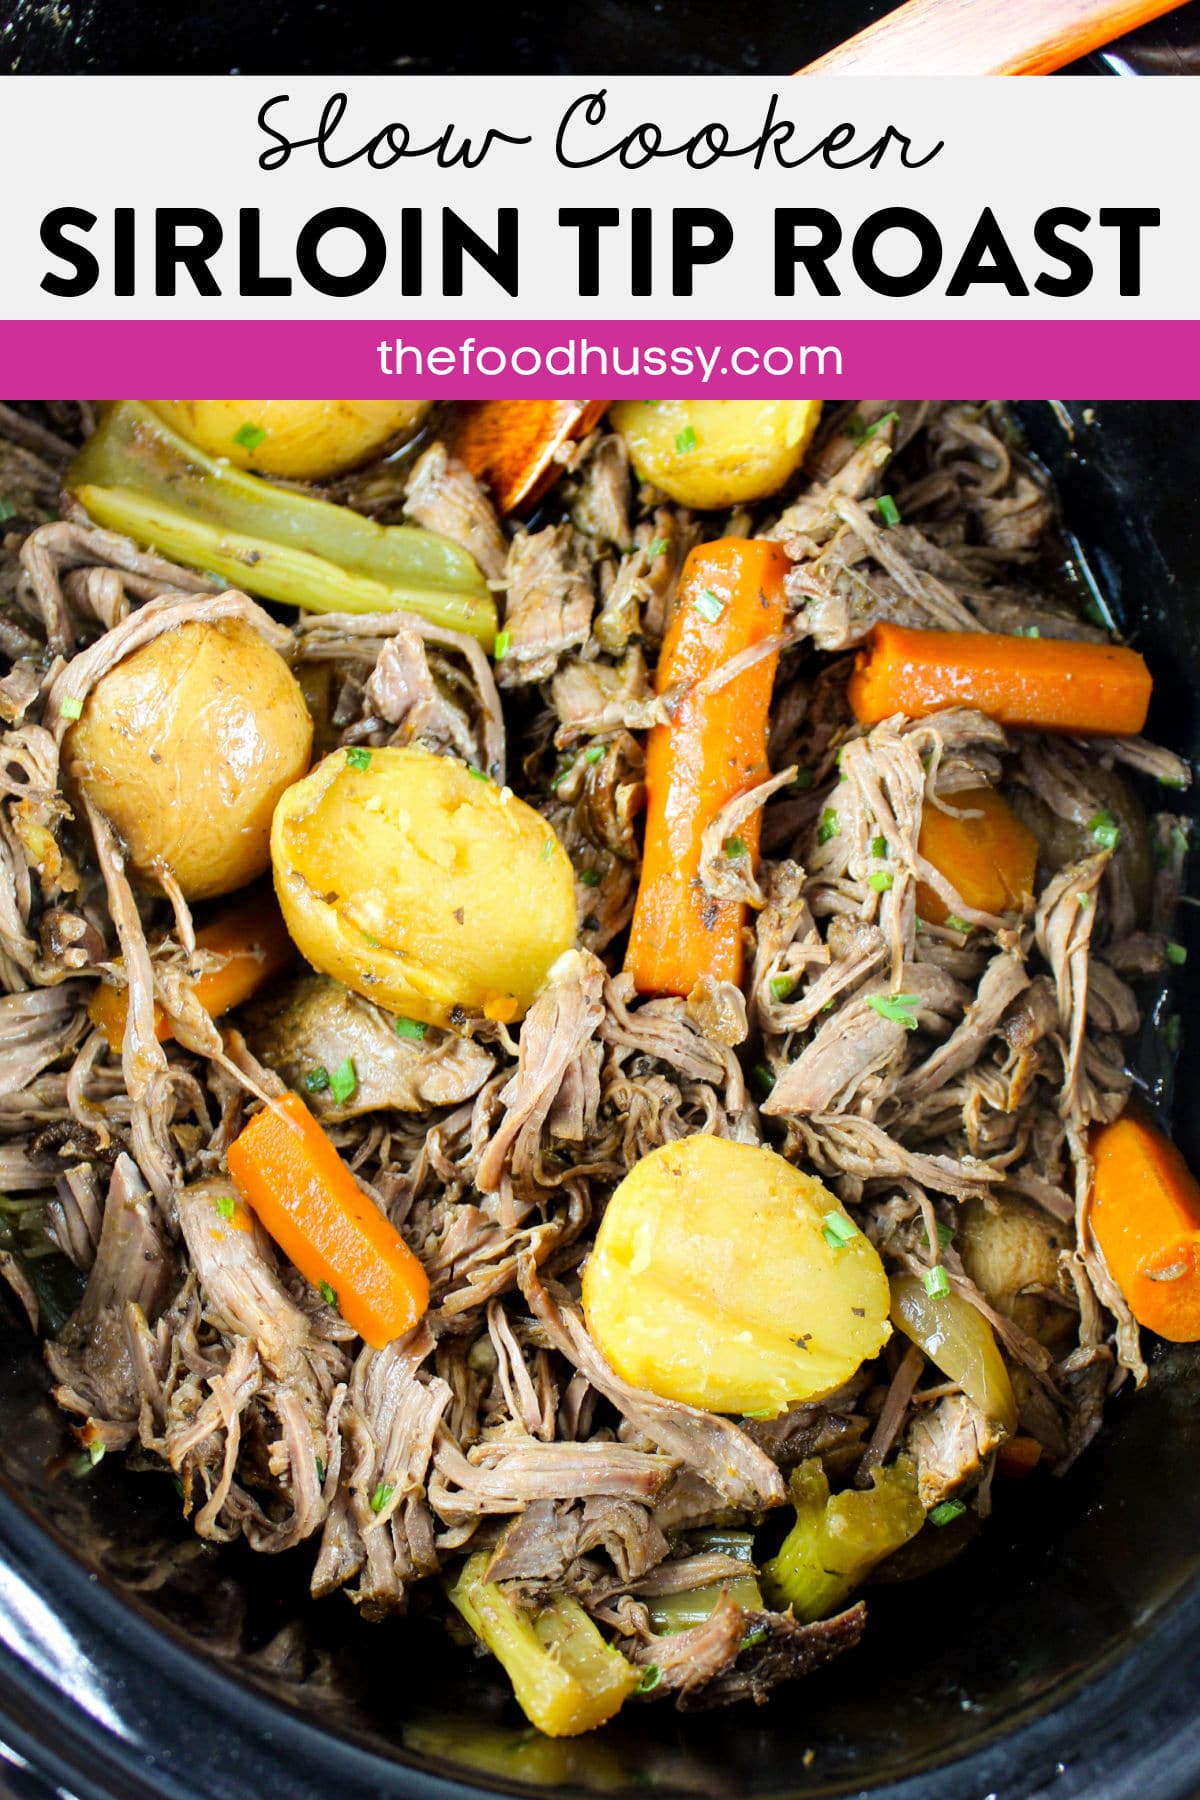 This Slow Cooker Beef Sirloin Tip Roast is the fall apart pot roast you'll remember from your mom's kitchen! Tender shredded beef with carrots, potatoes and a rich au jus sauce will have the entire family at the dinner table - forks in hand! via @foodhussy